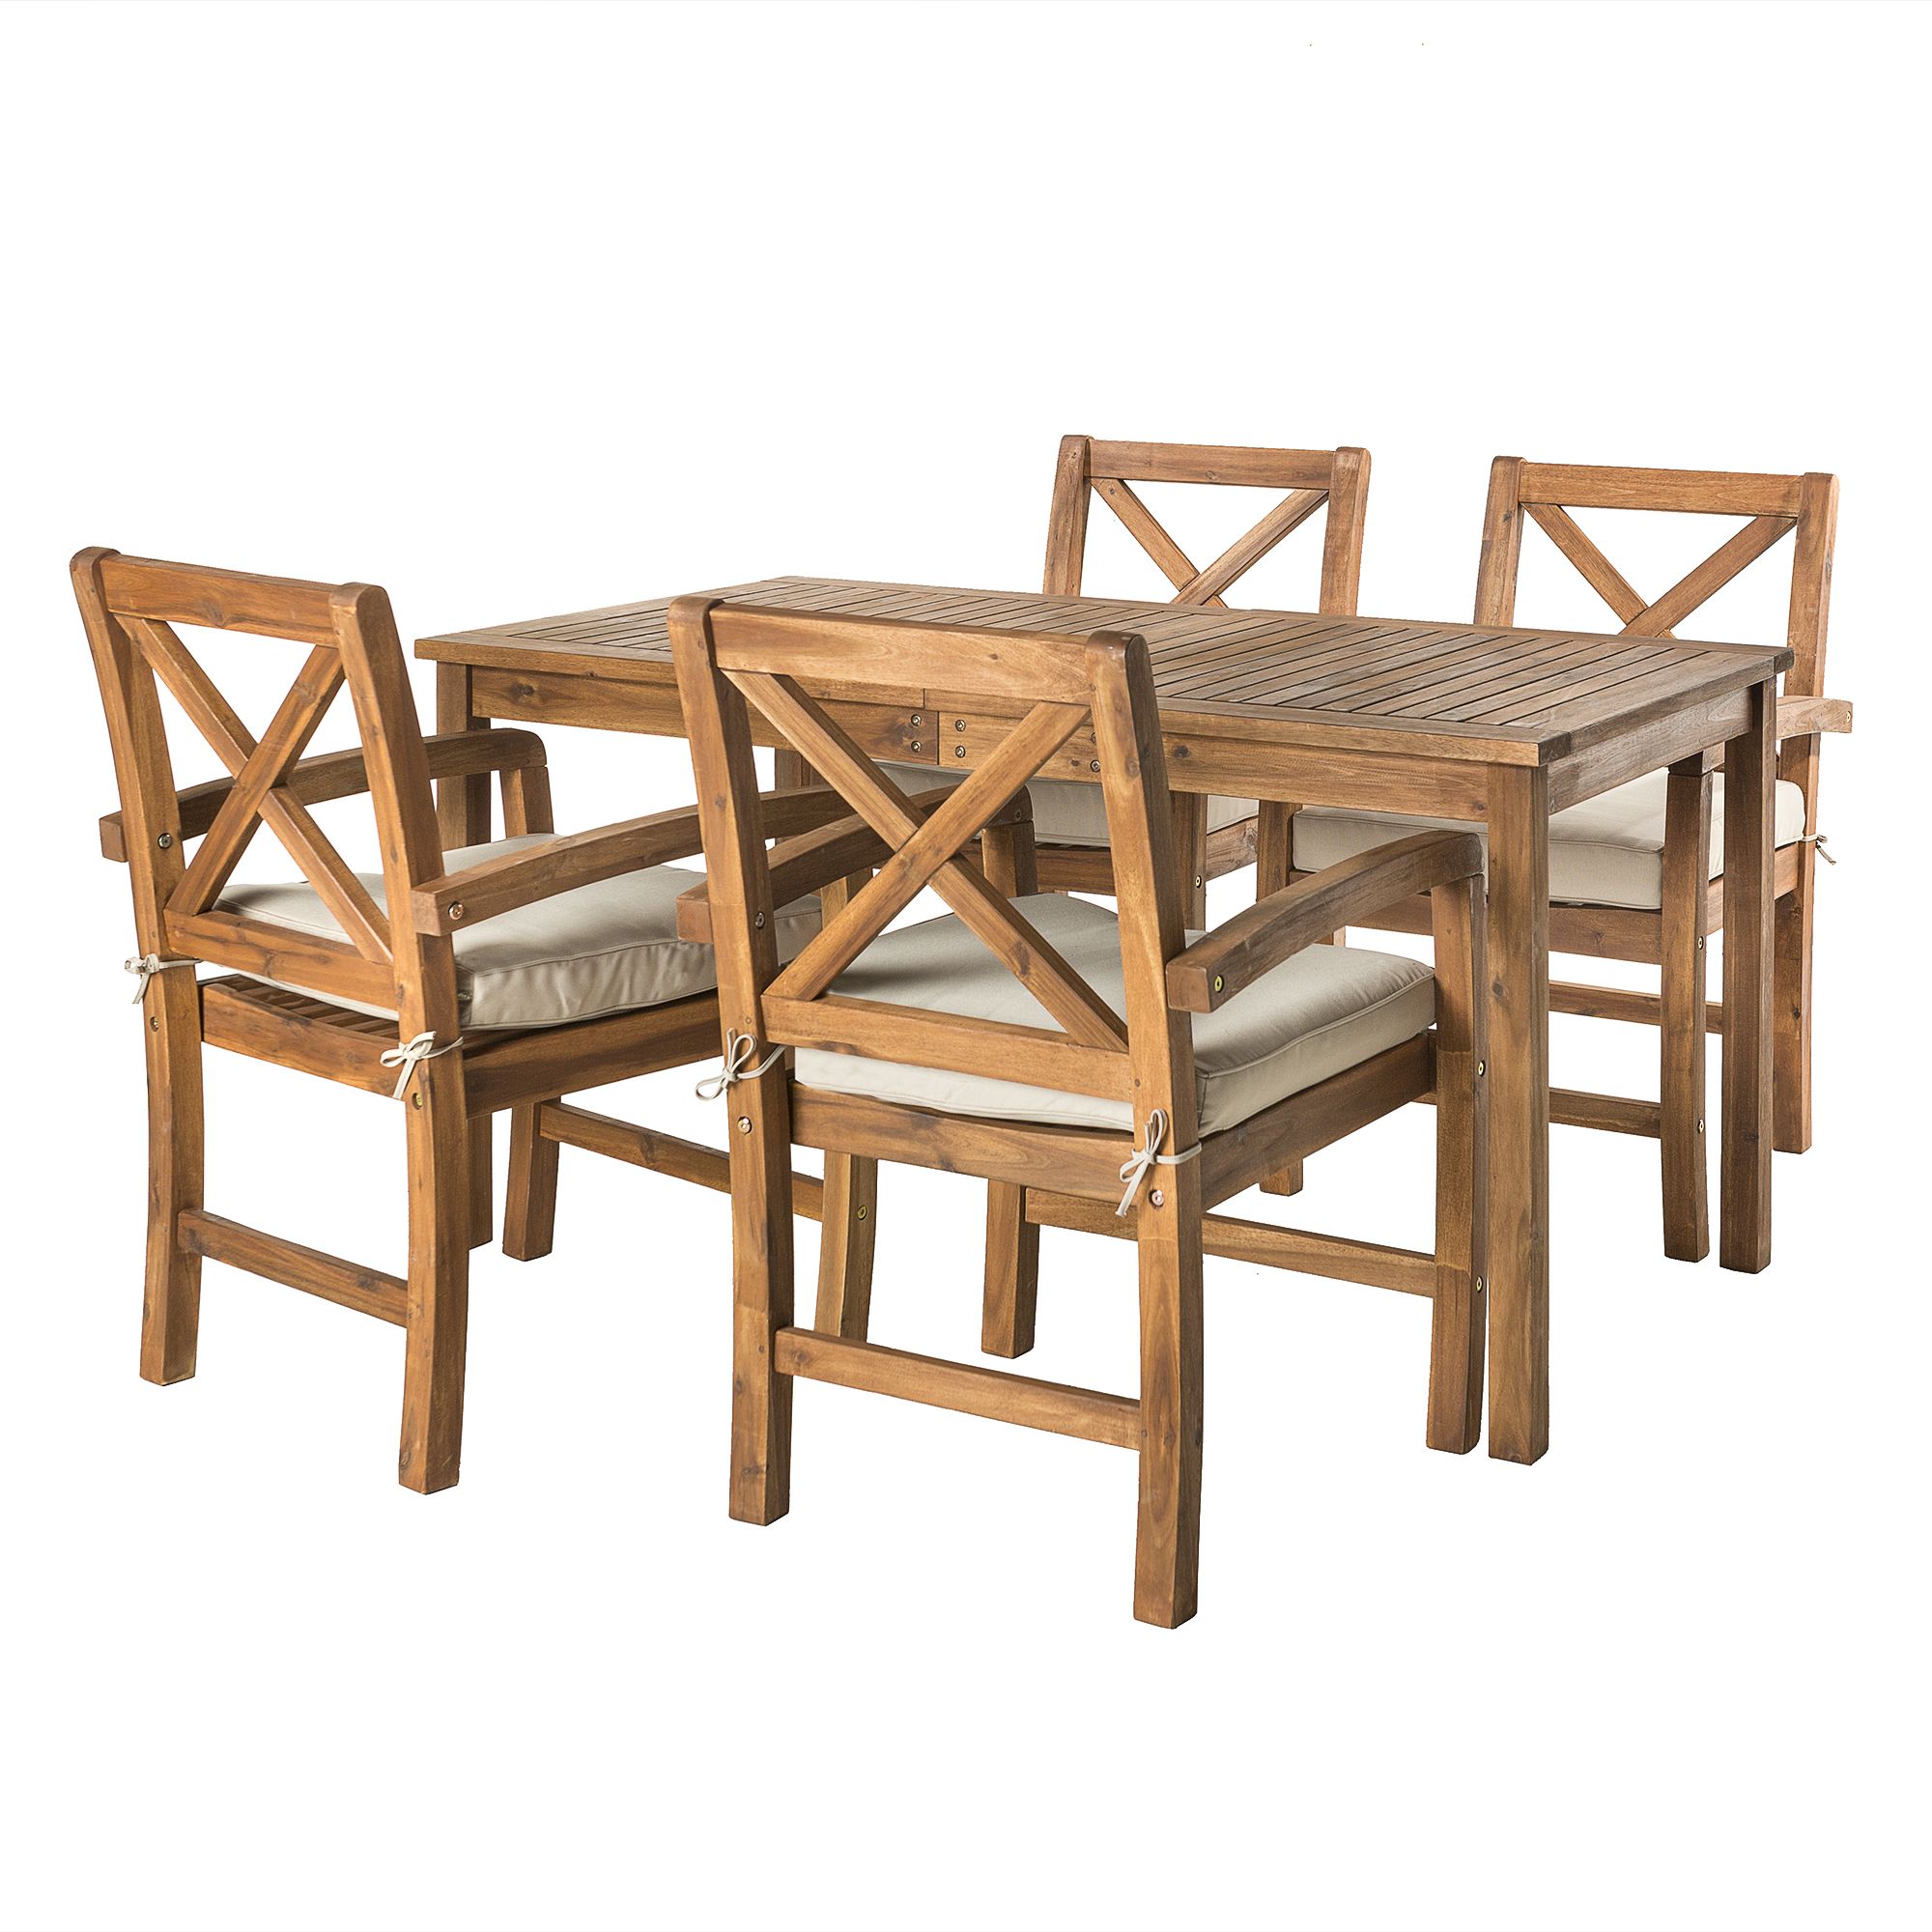 W. Trends 5-Pc. Acacia Wood Outdoor Dining Set - Brown